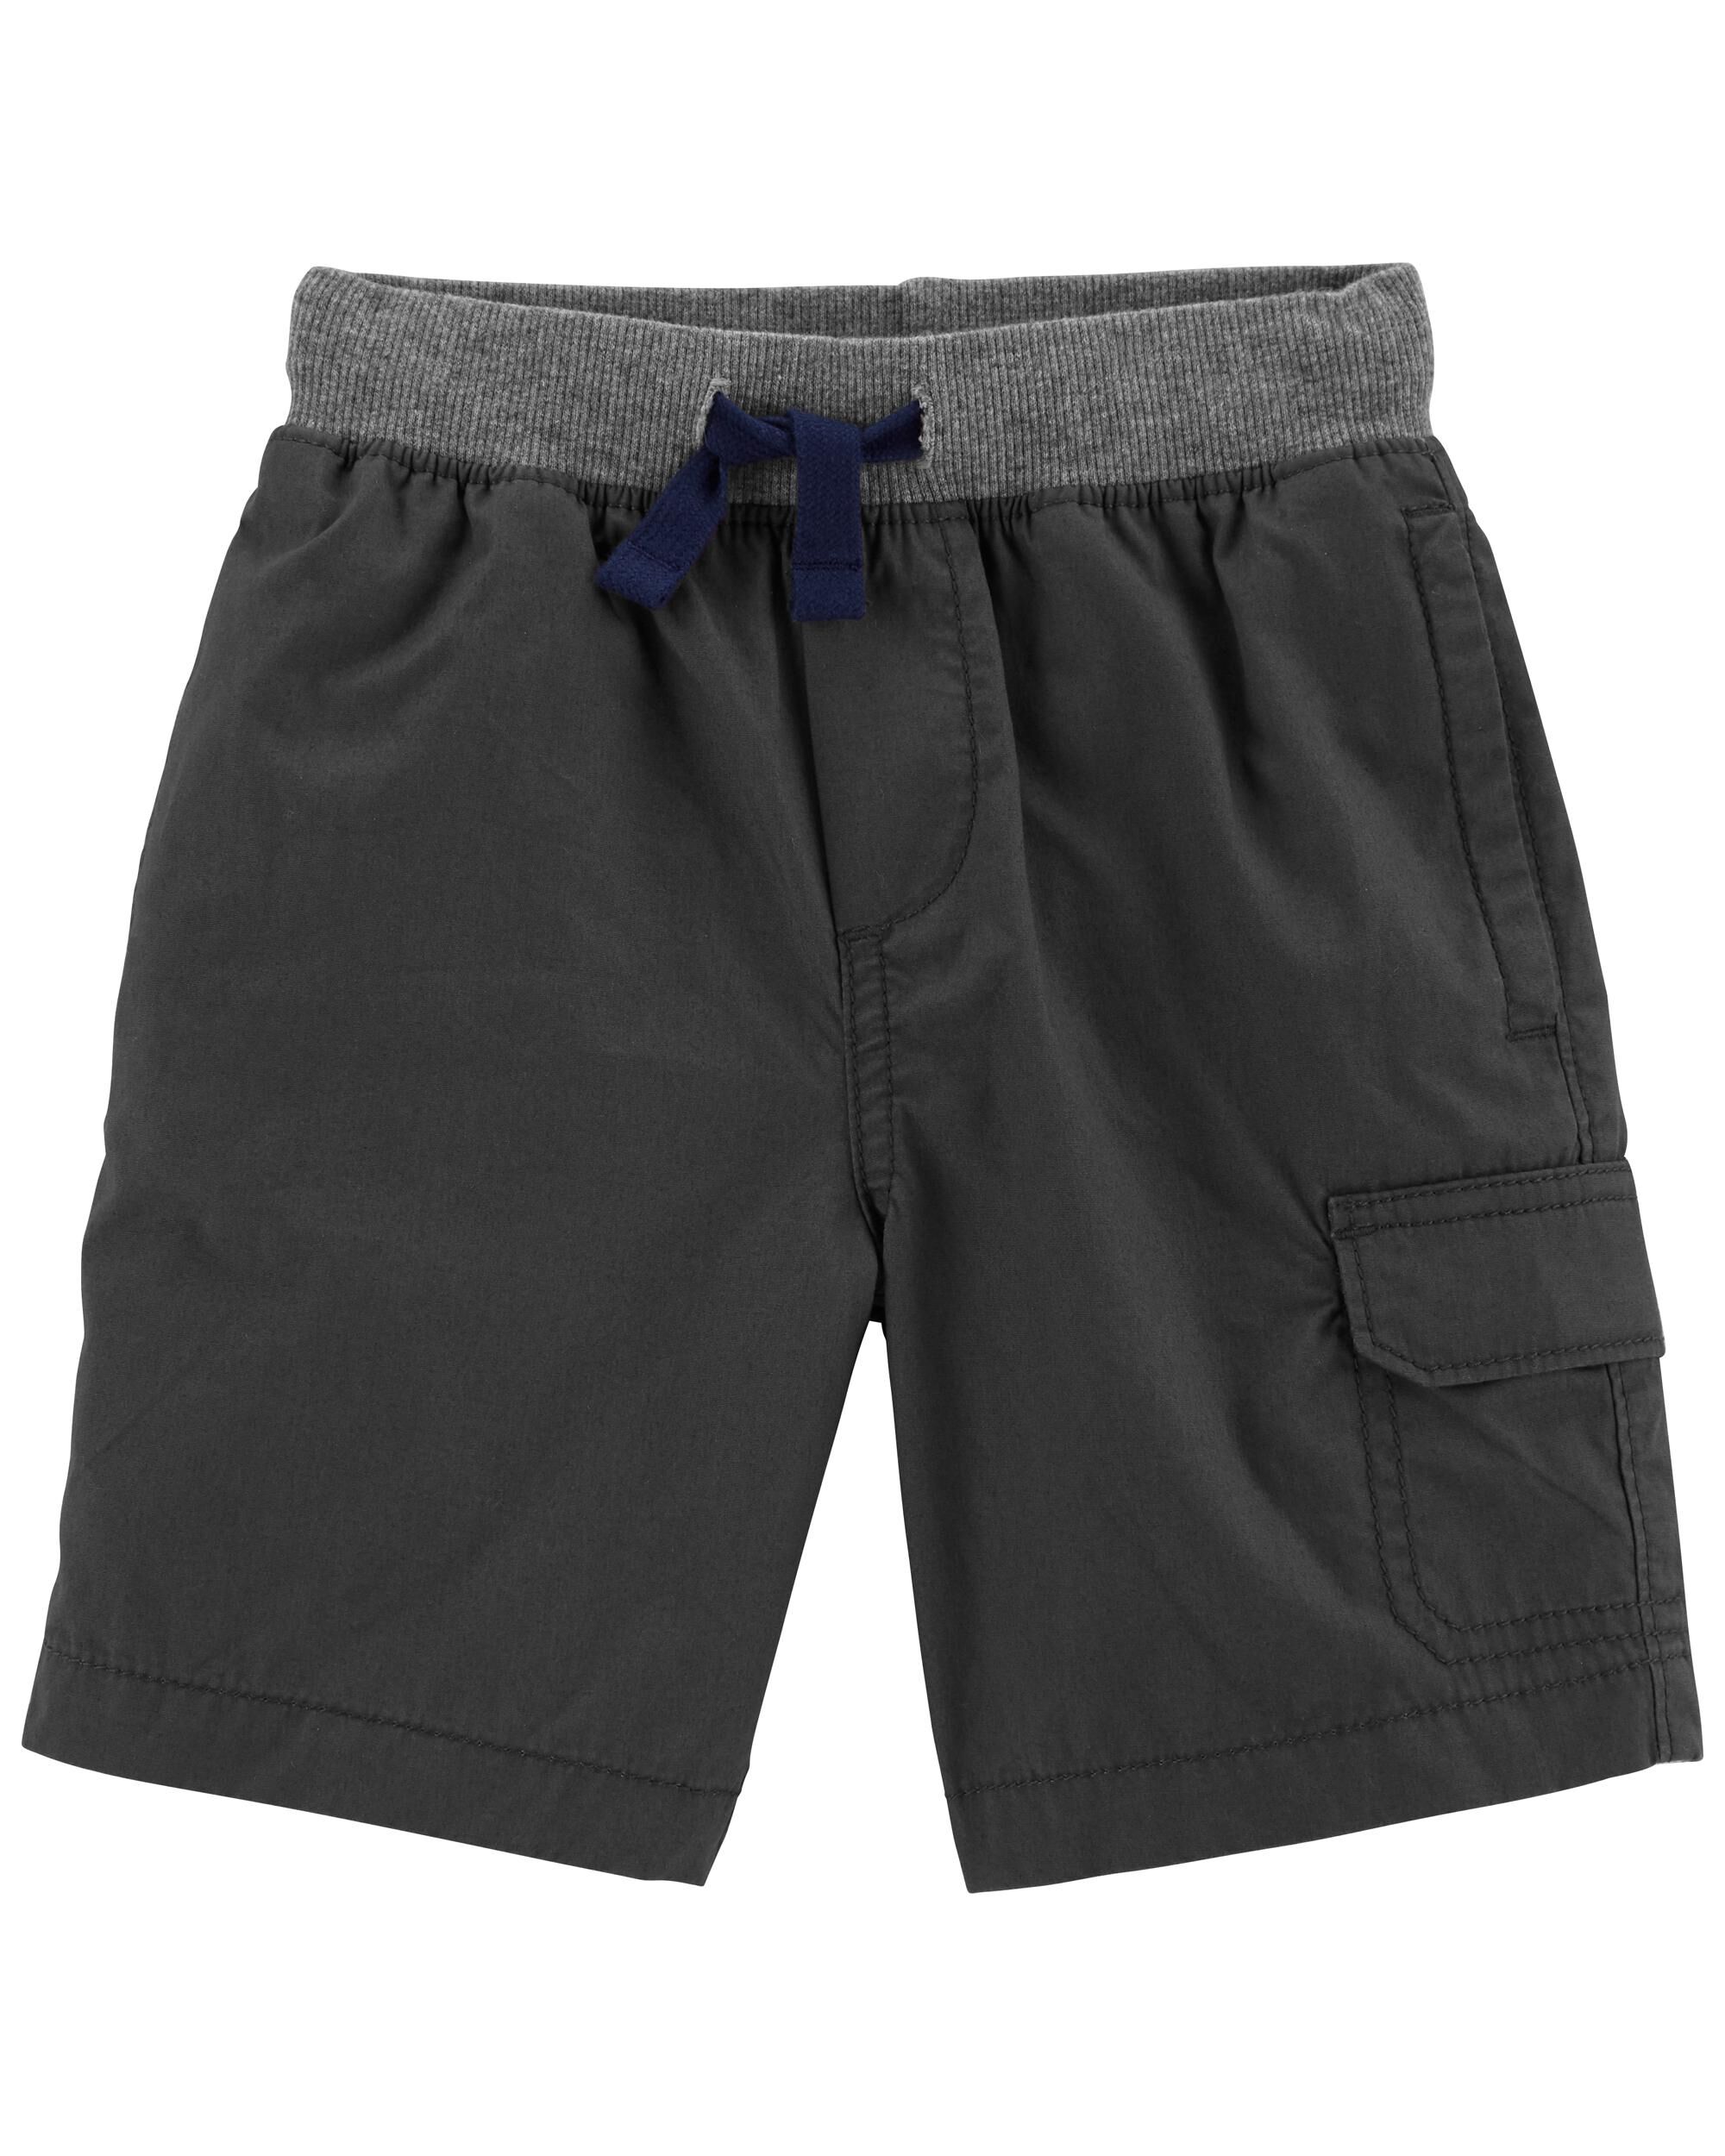 Carters Toddler Pull-On Cargo Shorts